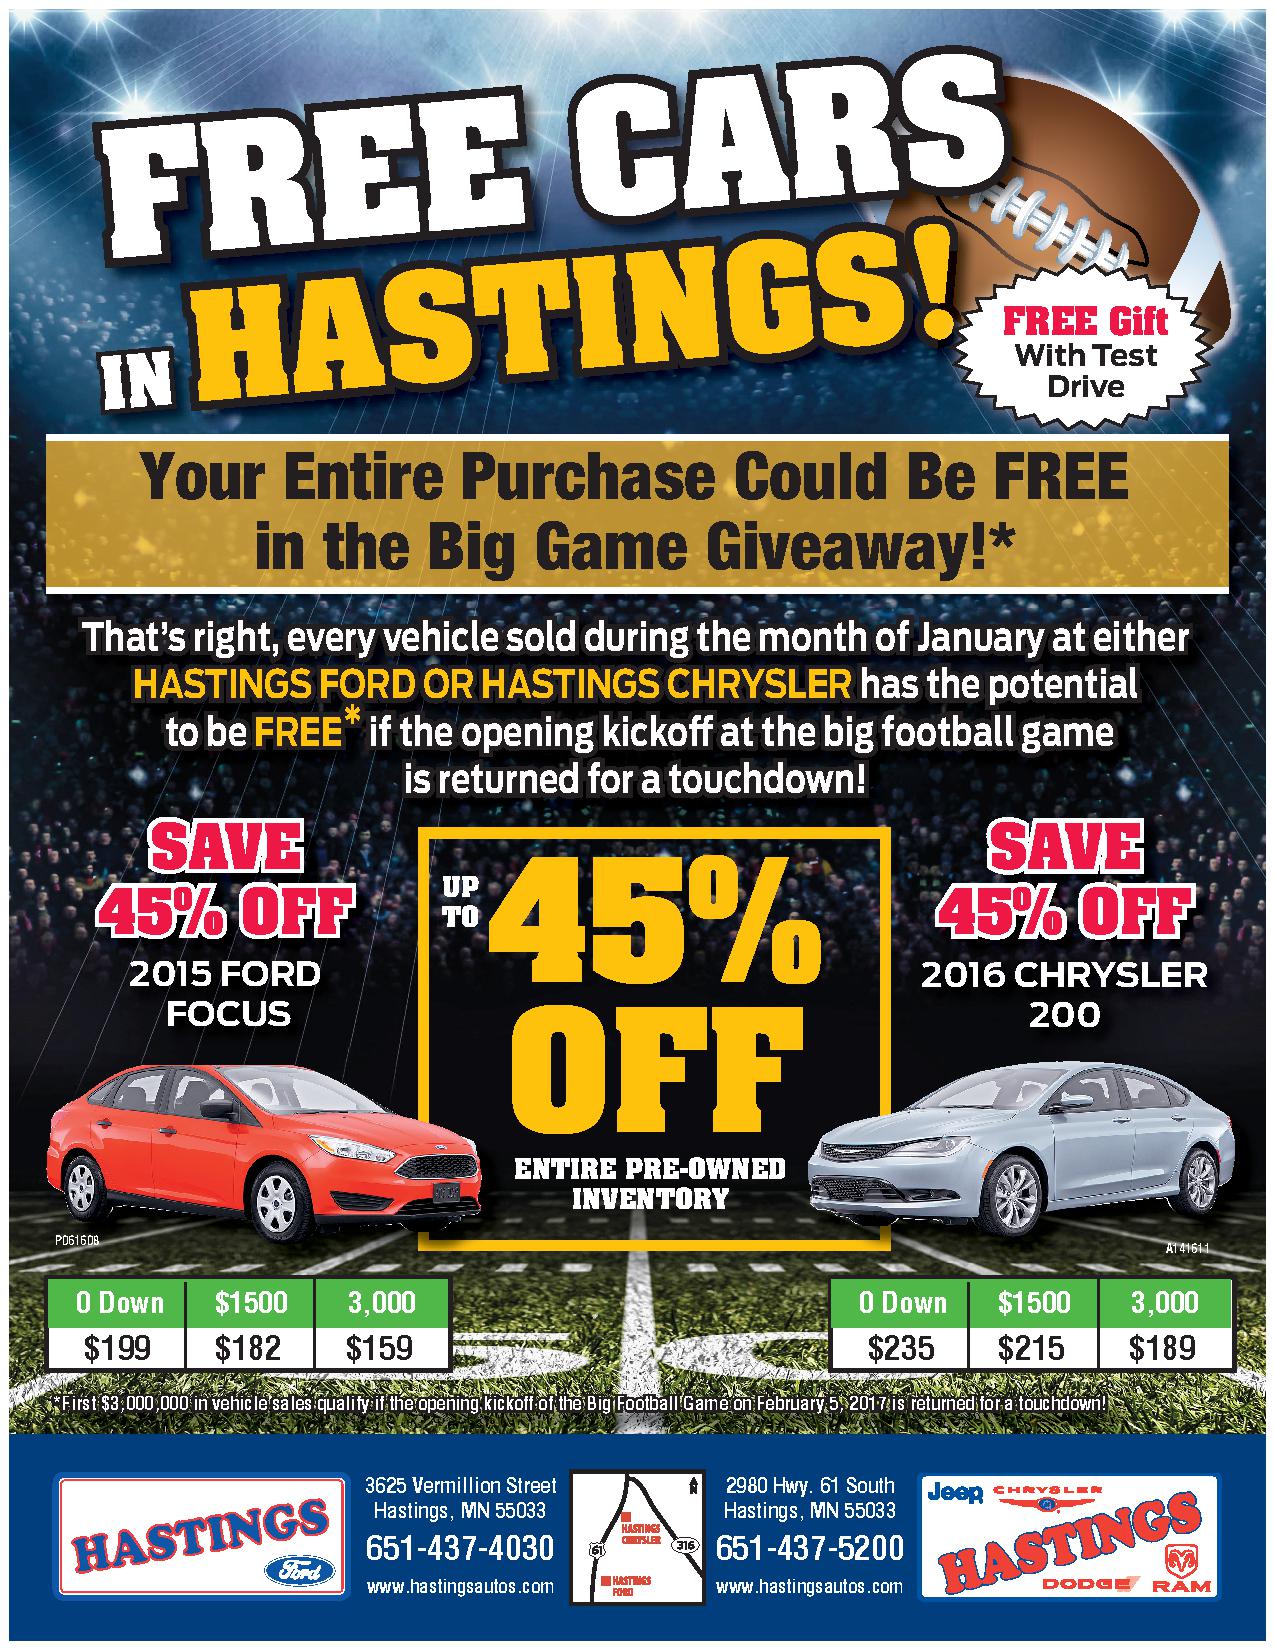 FREE CARS GIVEAWAY Hastings Chrysler Center Inc